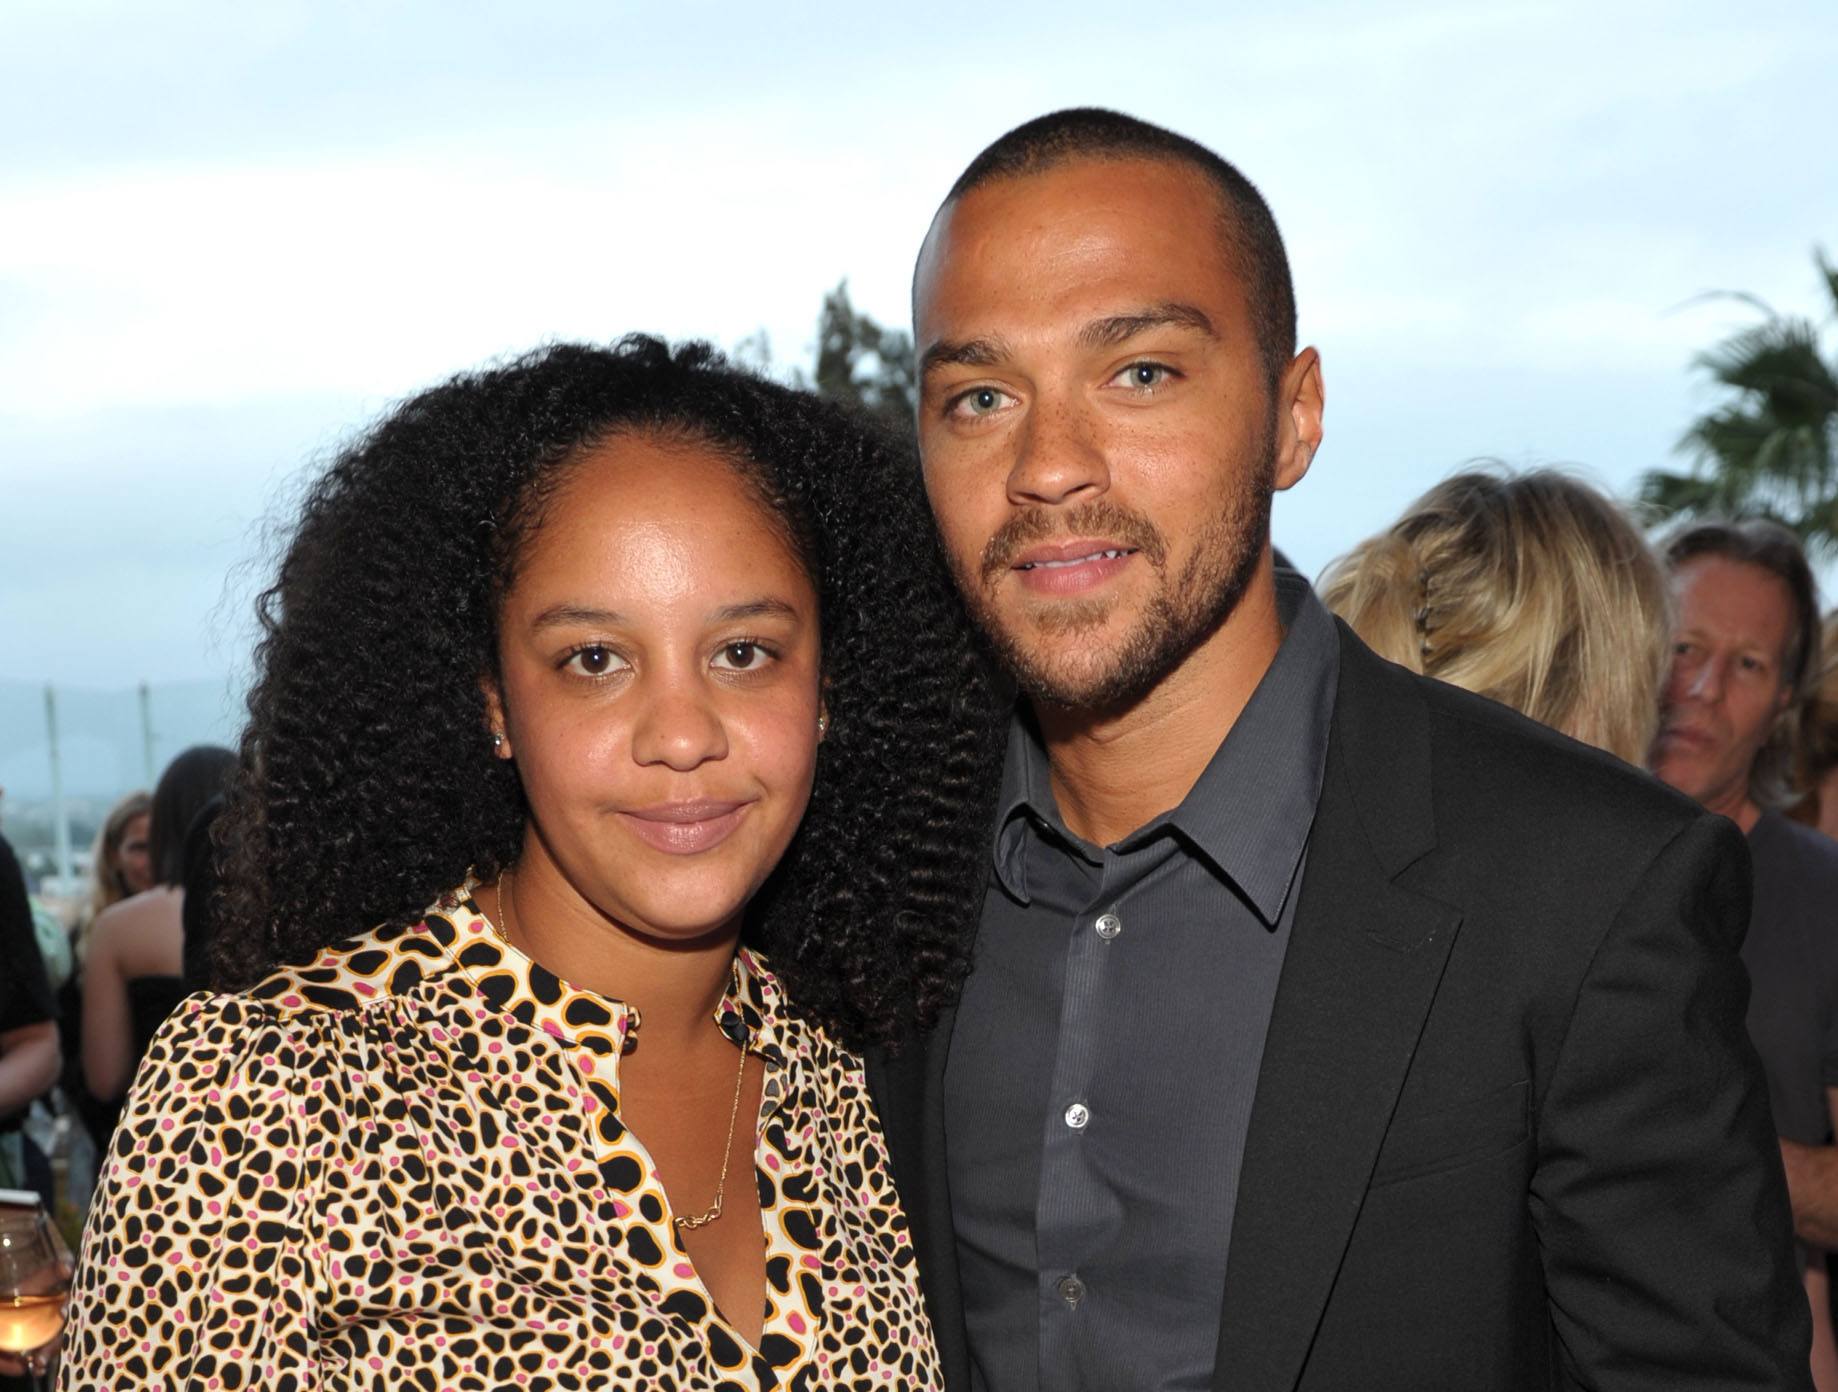 ‘Grey’s Anatomy’ Star Jesse Williams Ordered to Pay $100,000 in Child Support and Alimony